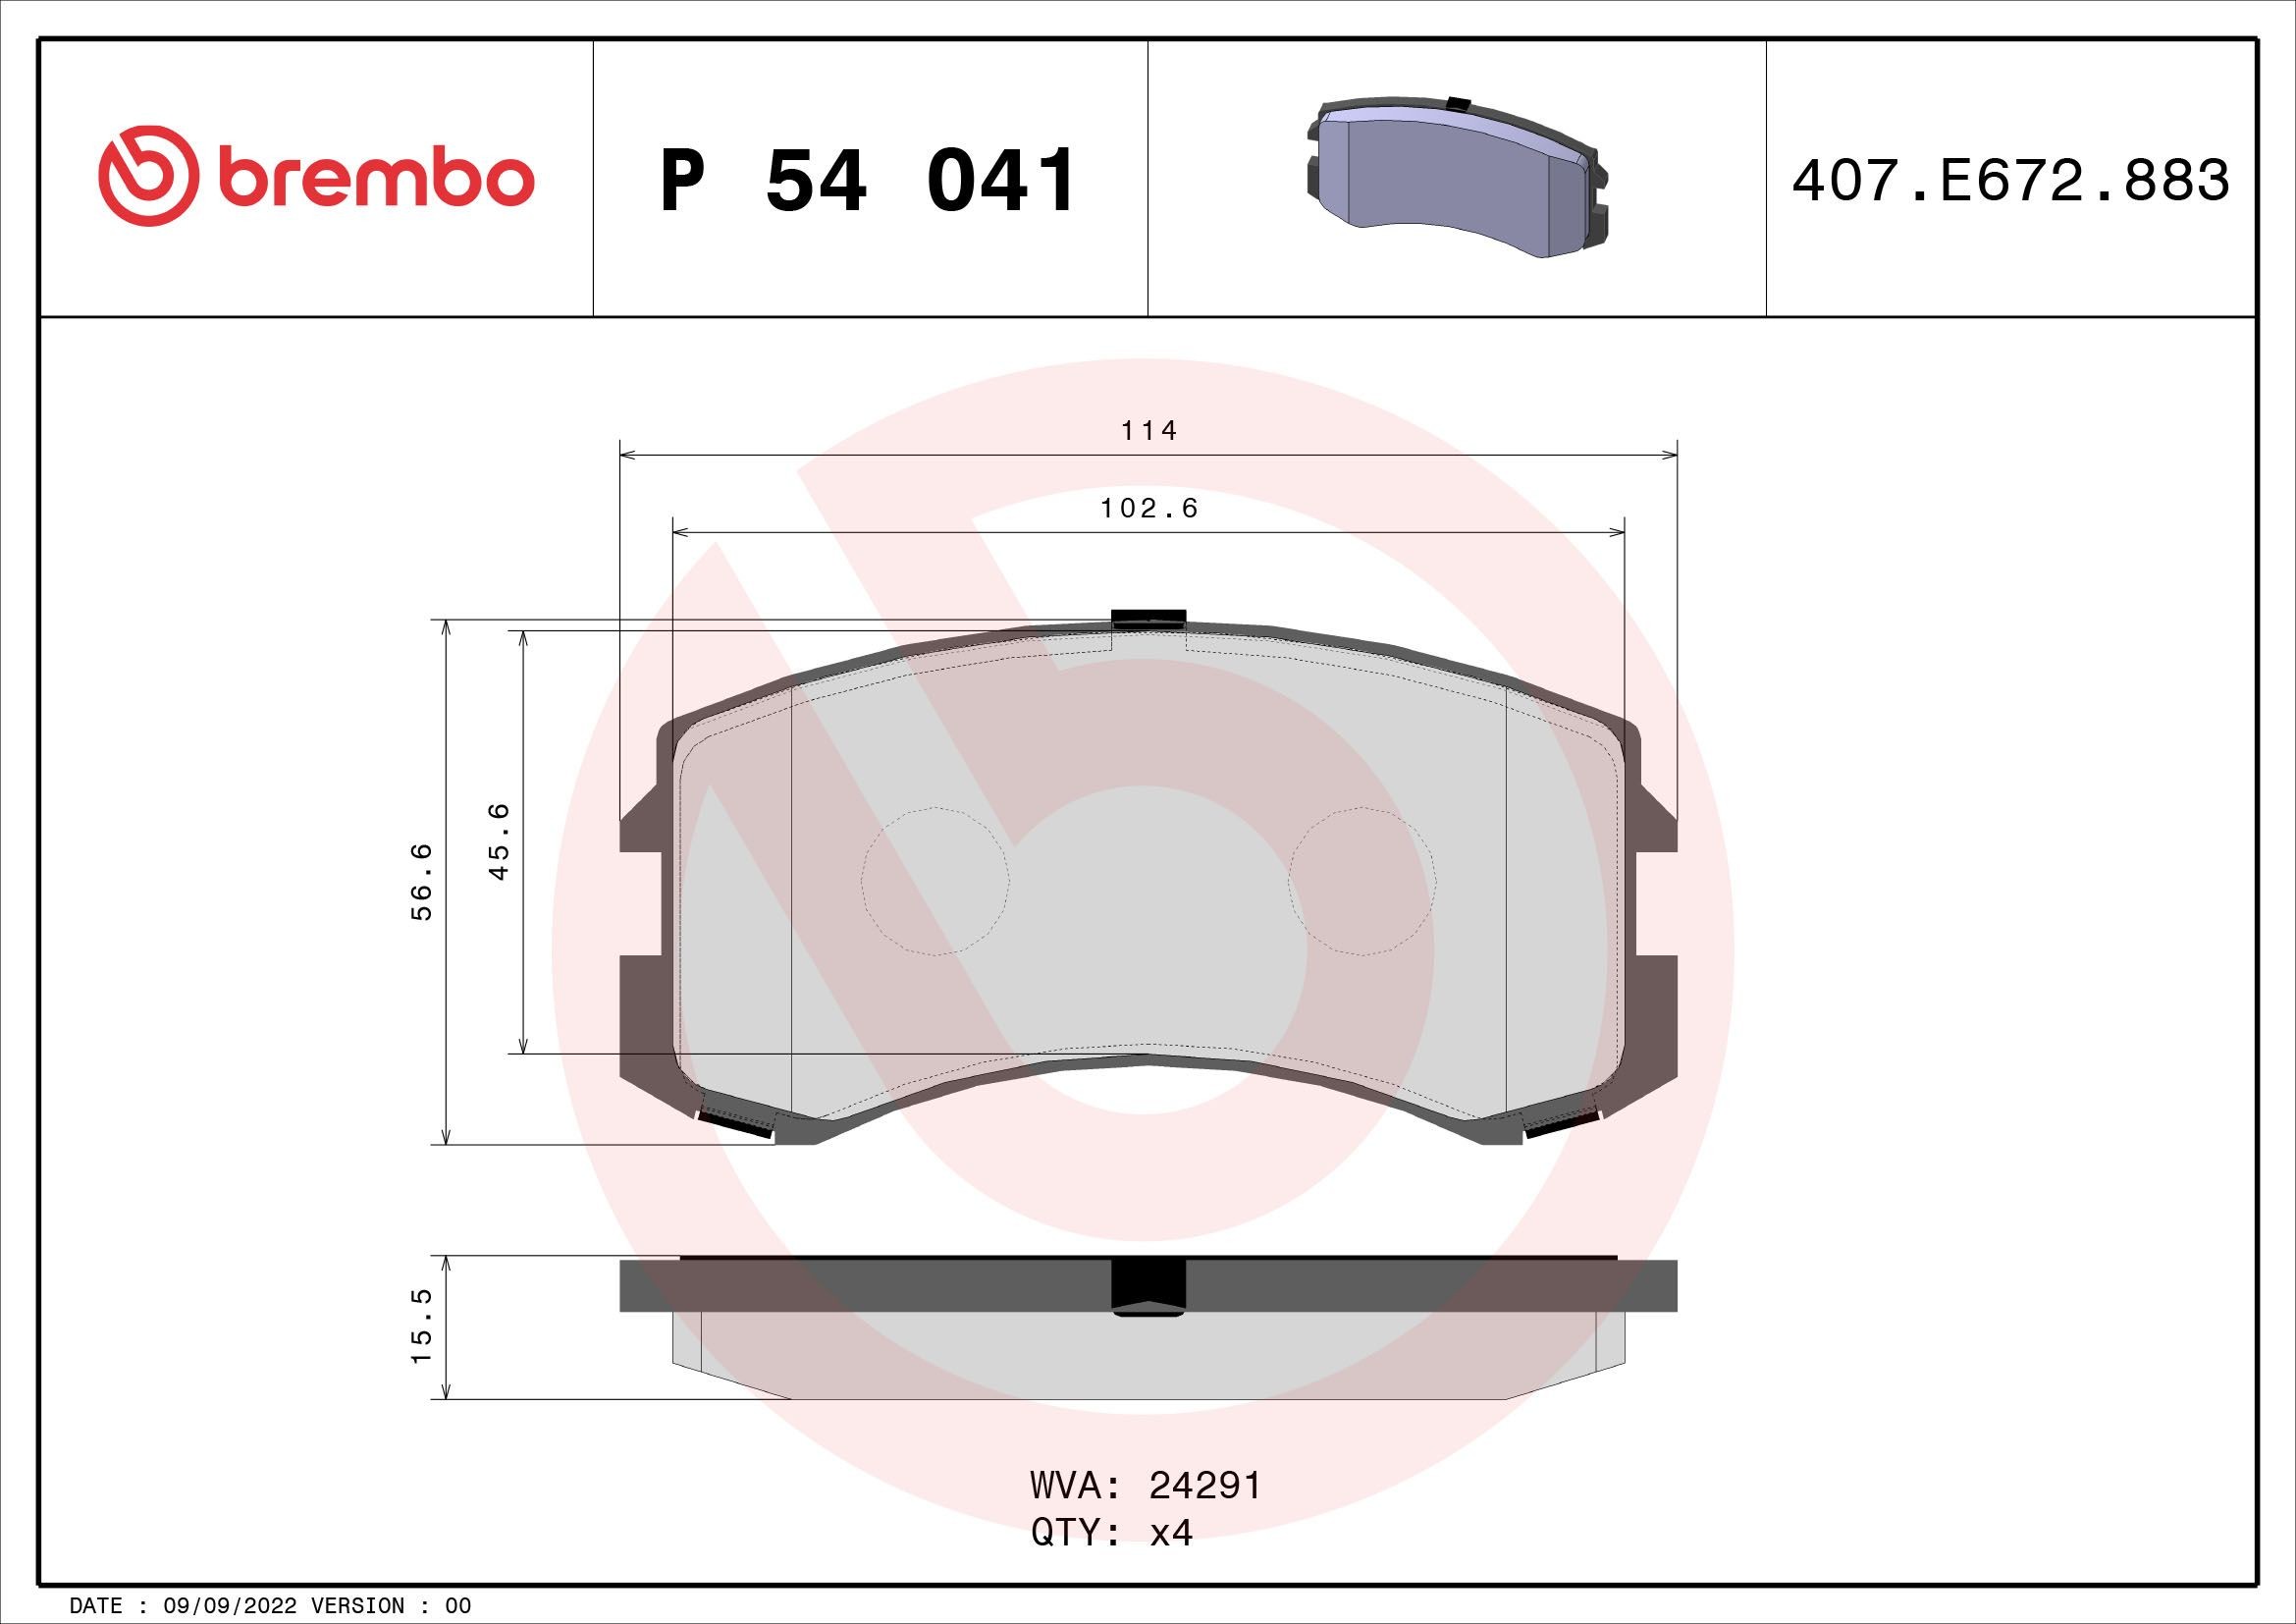 BREMBO P 54 041 Brake pad set excl. wear warning contact, without accessories